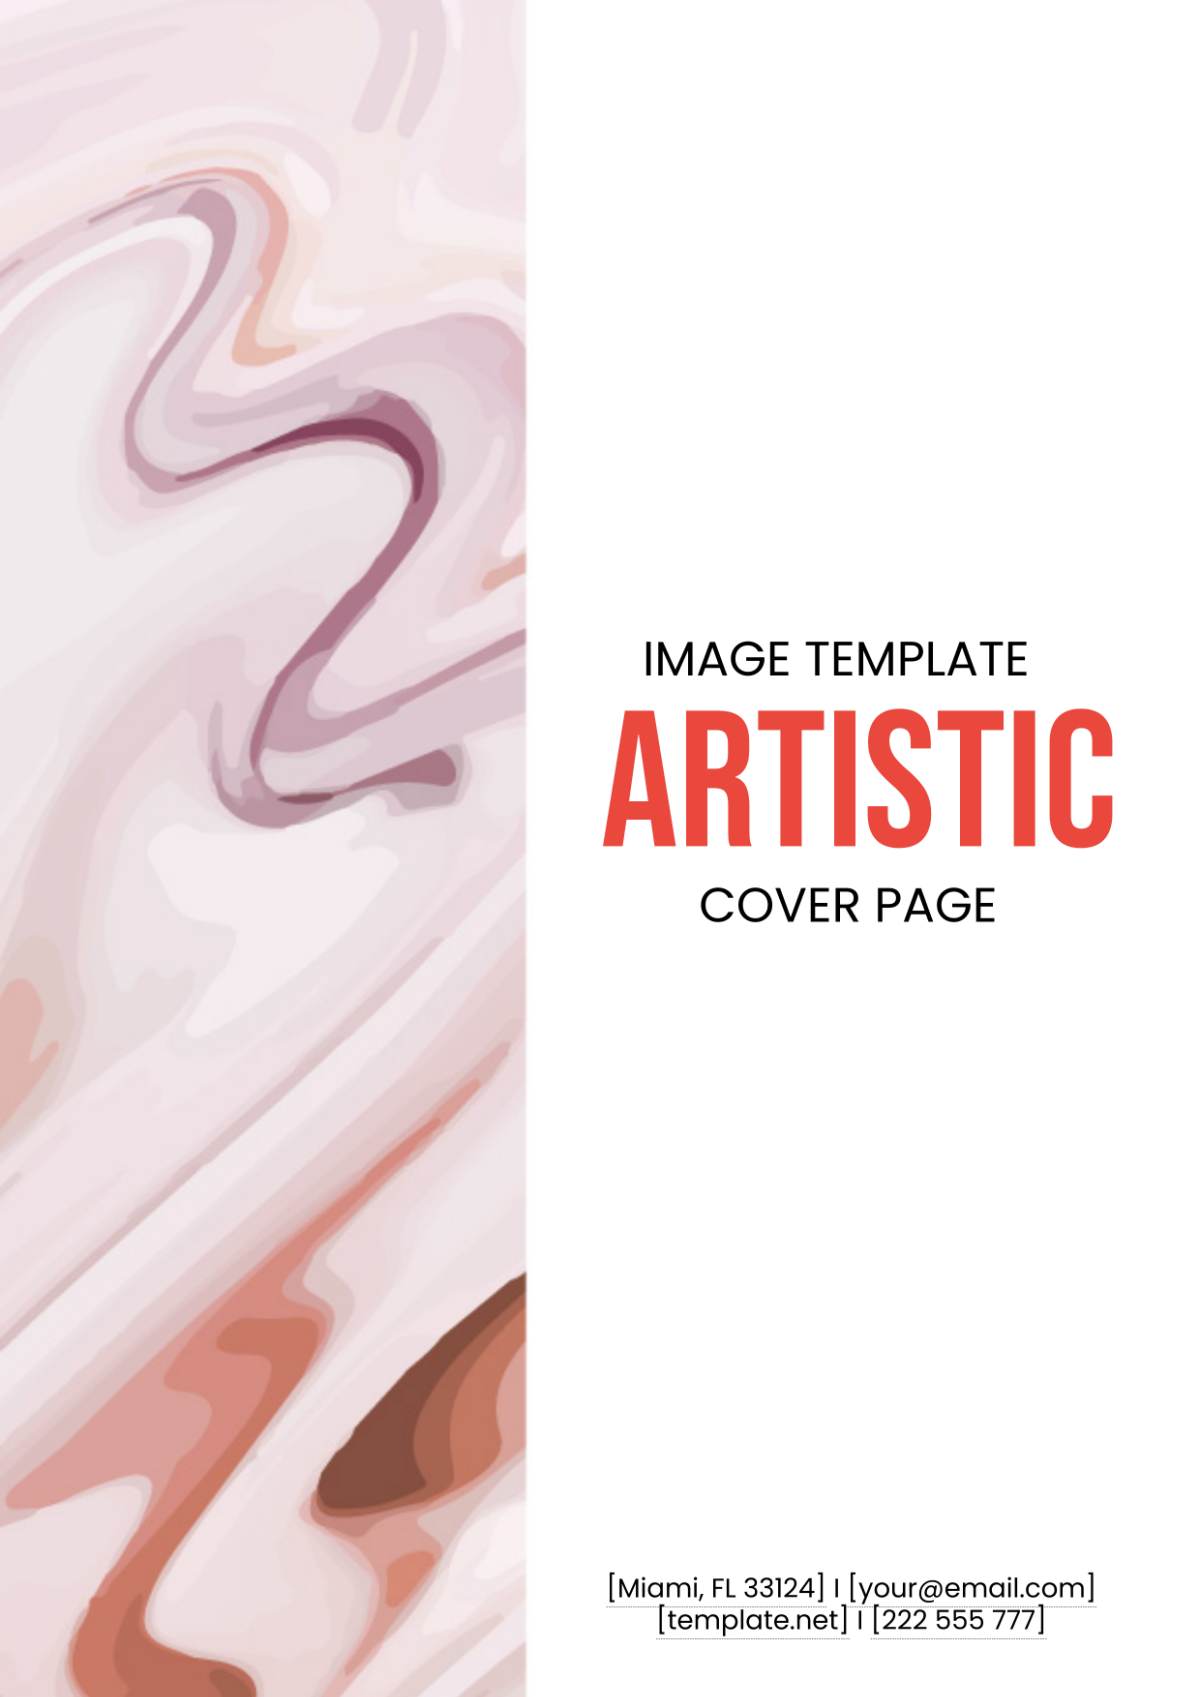 Free Artistic Cover Page Image Template